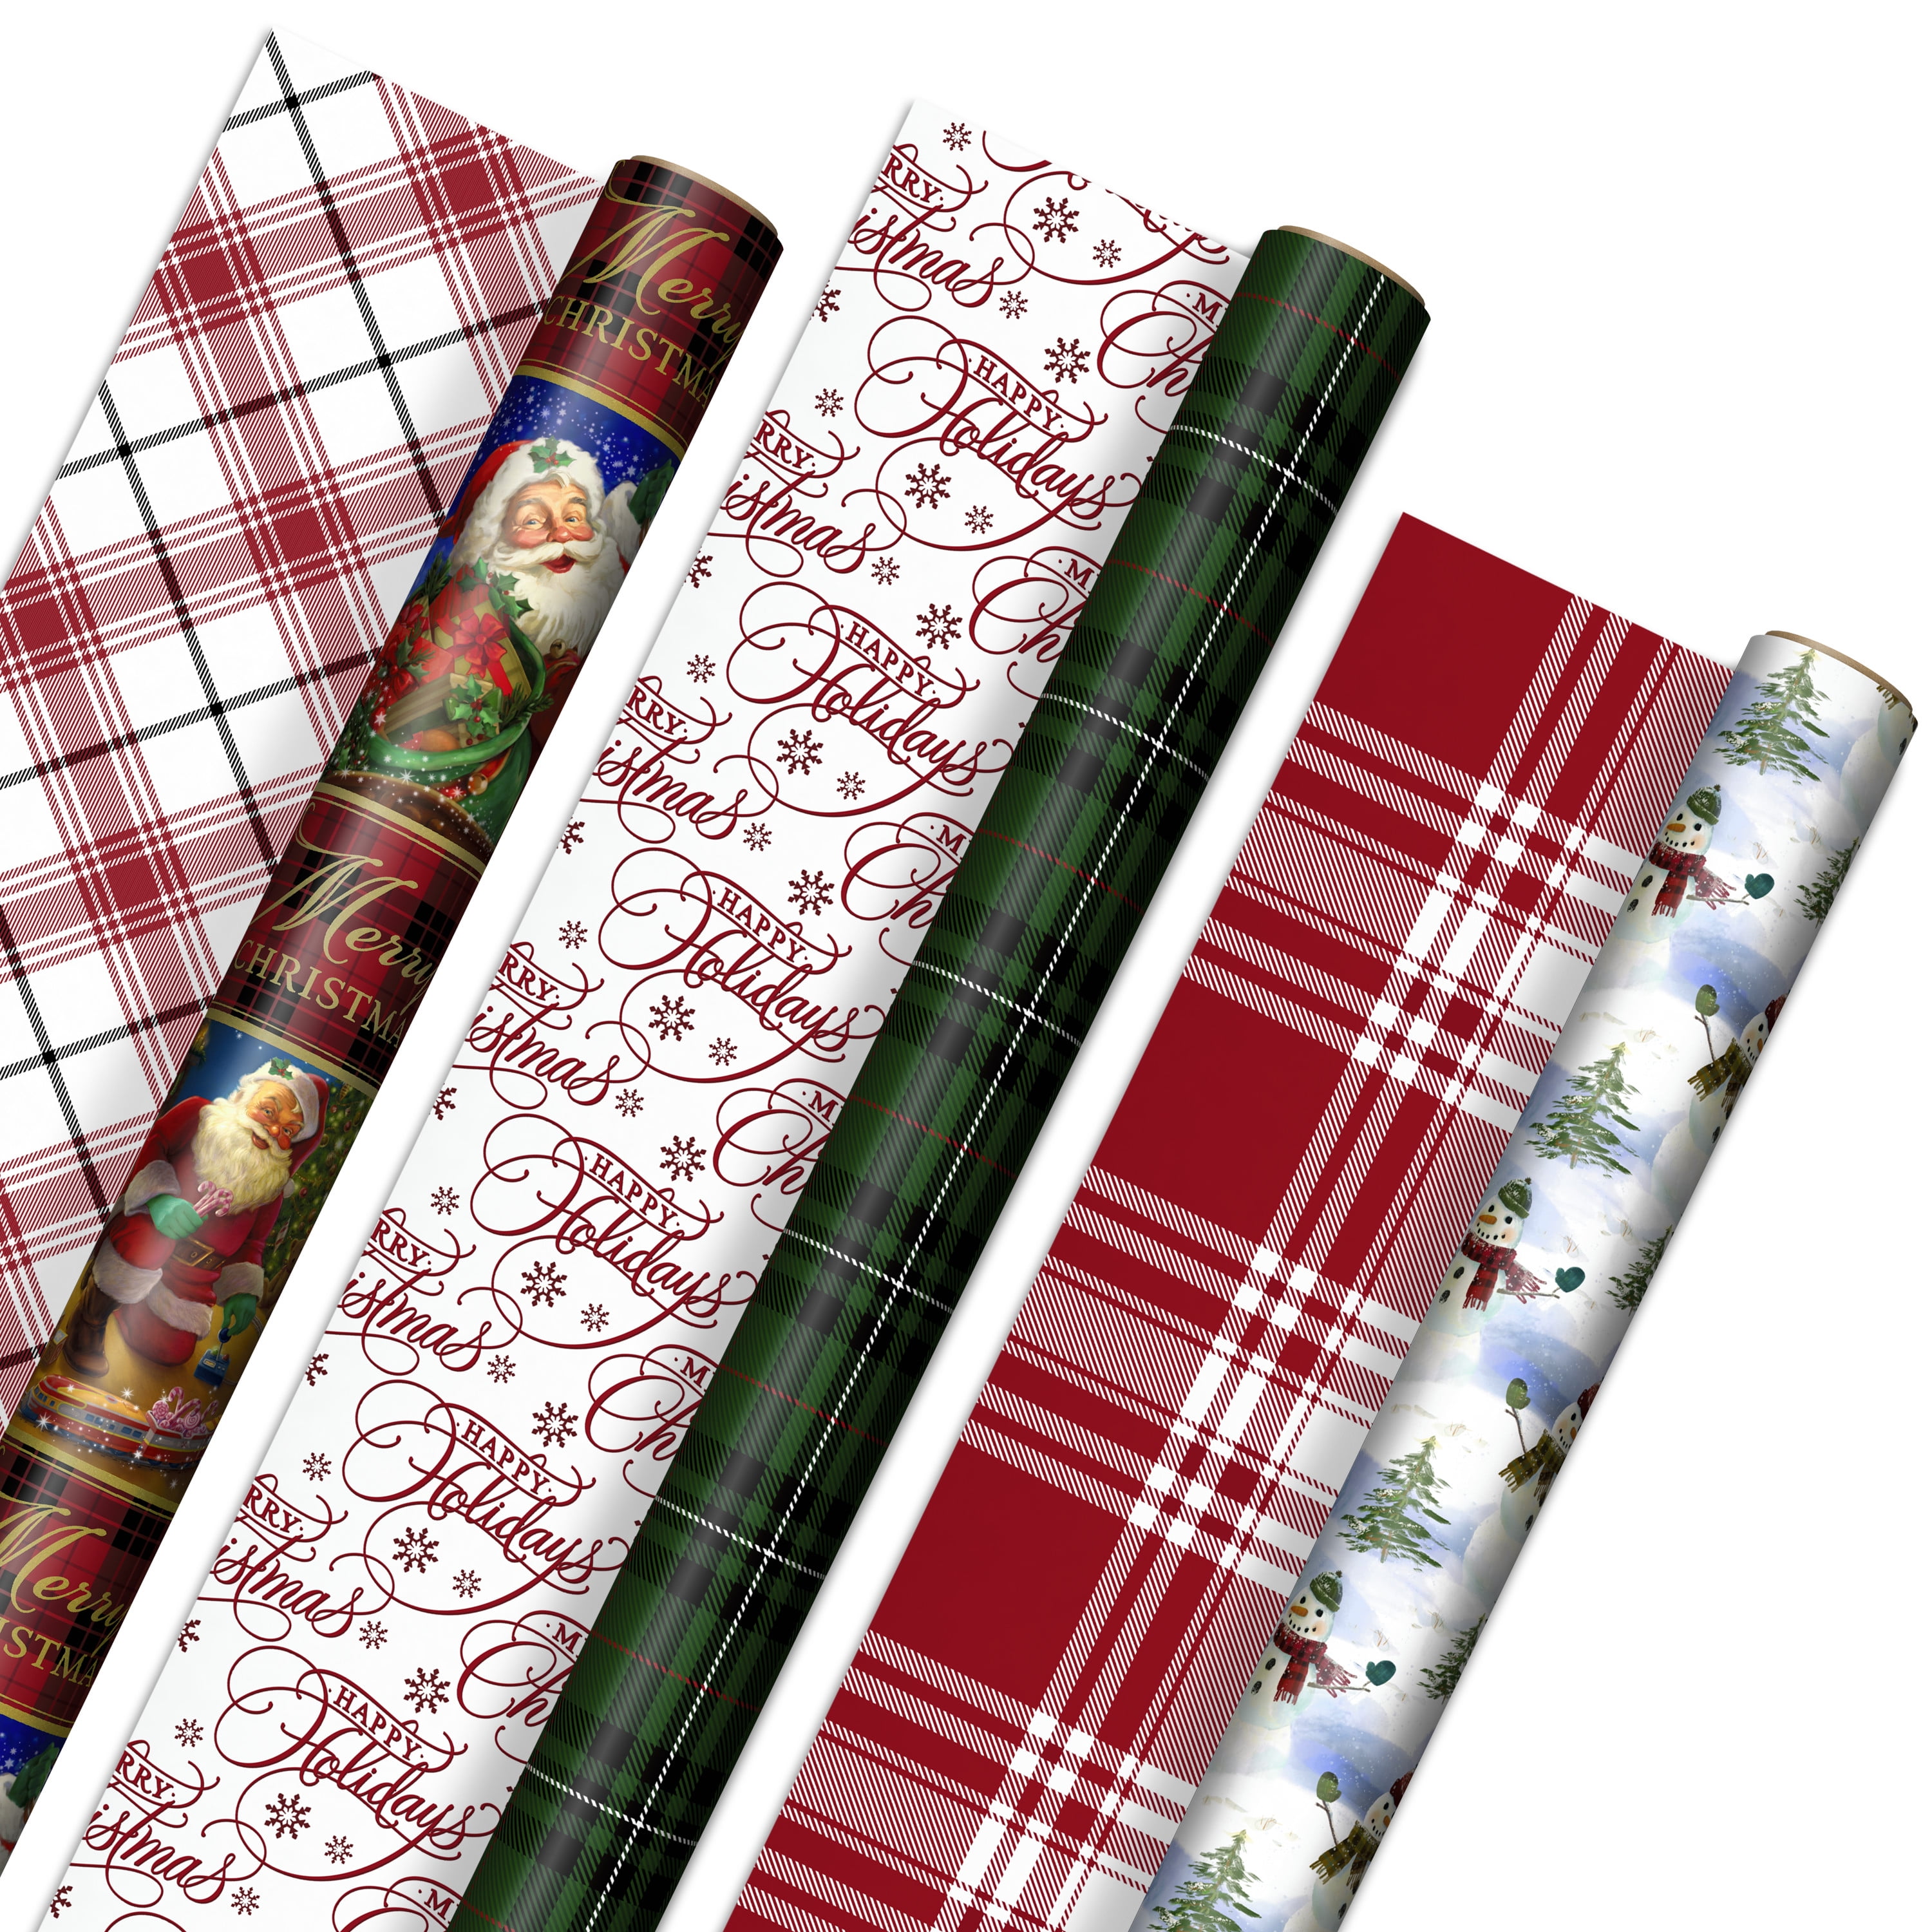 5-40 METRES CHRISTMAS WRAPPING PAPER PRESENT WRAP SANTA ASSORTED DESIGNS NEW 